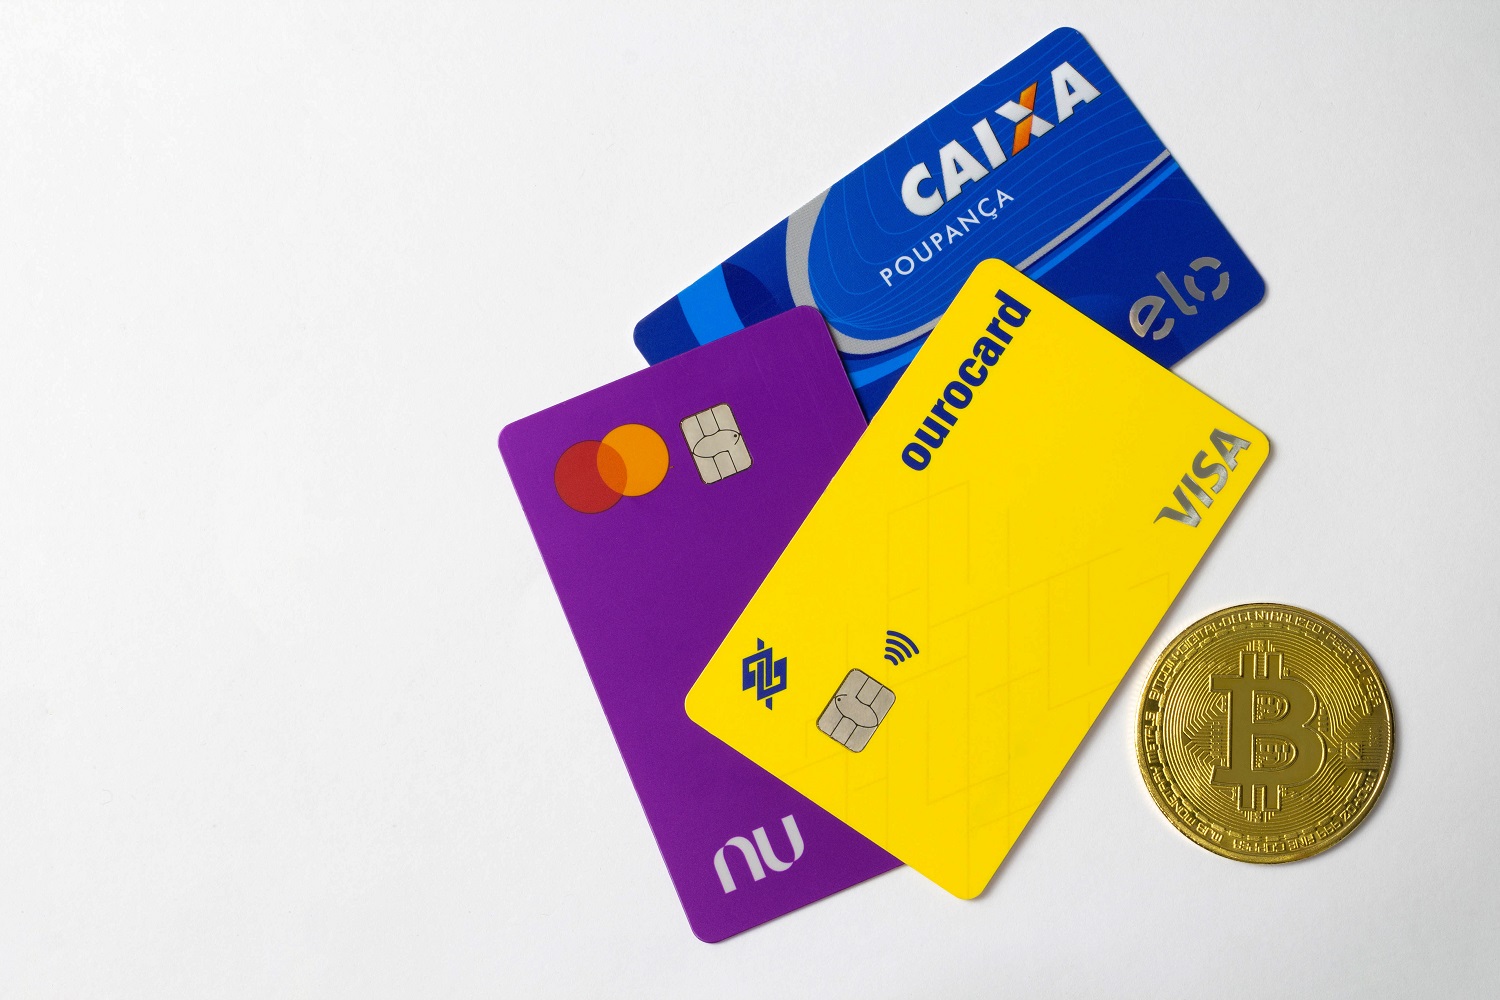 Three Brazilian bank cards next to a metal coin intended to represent Bitcoin.